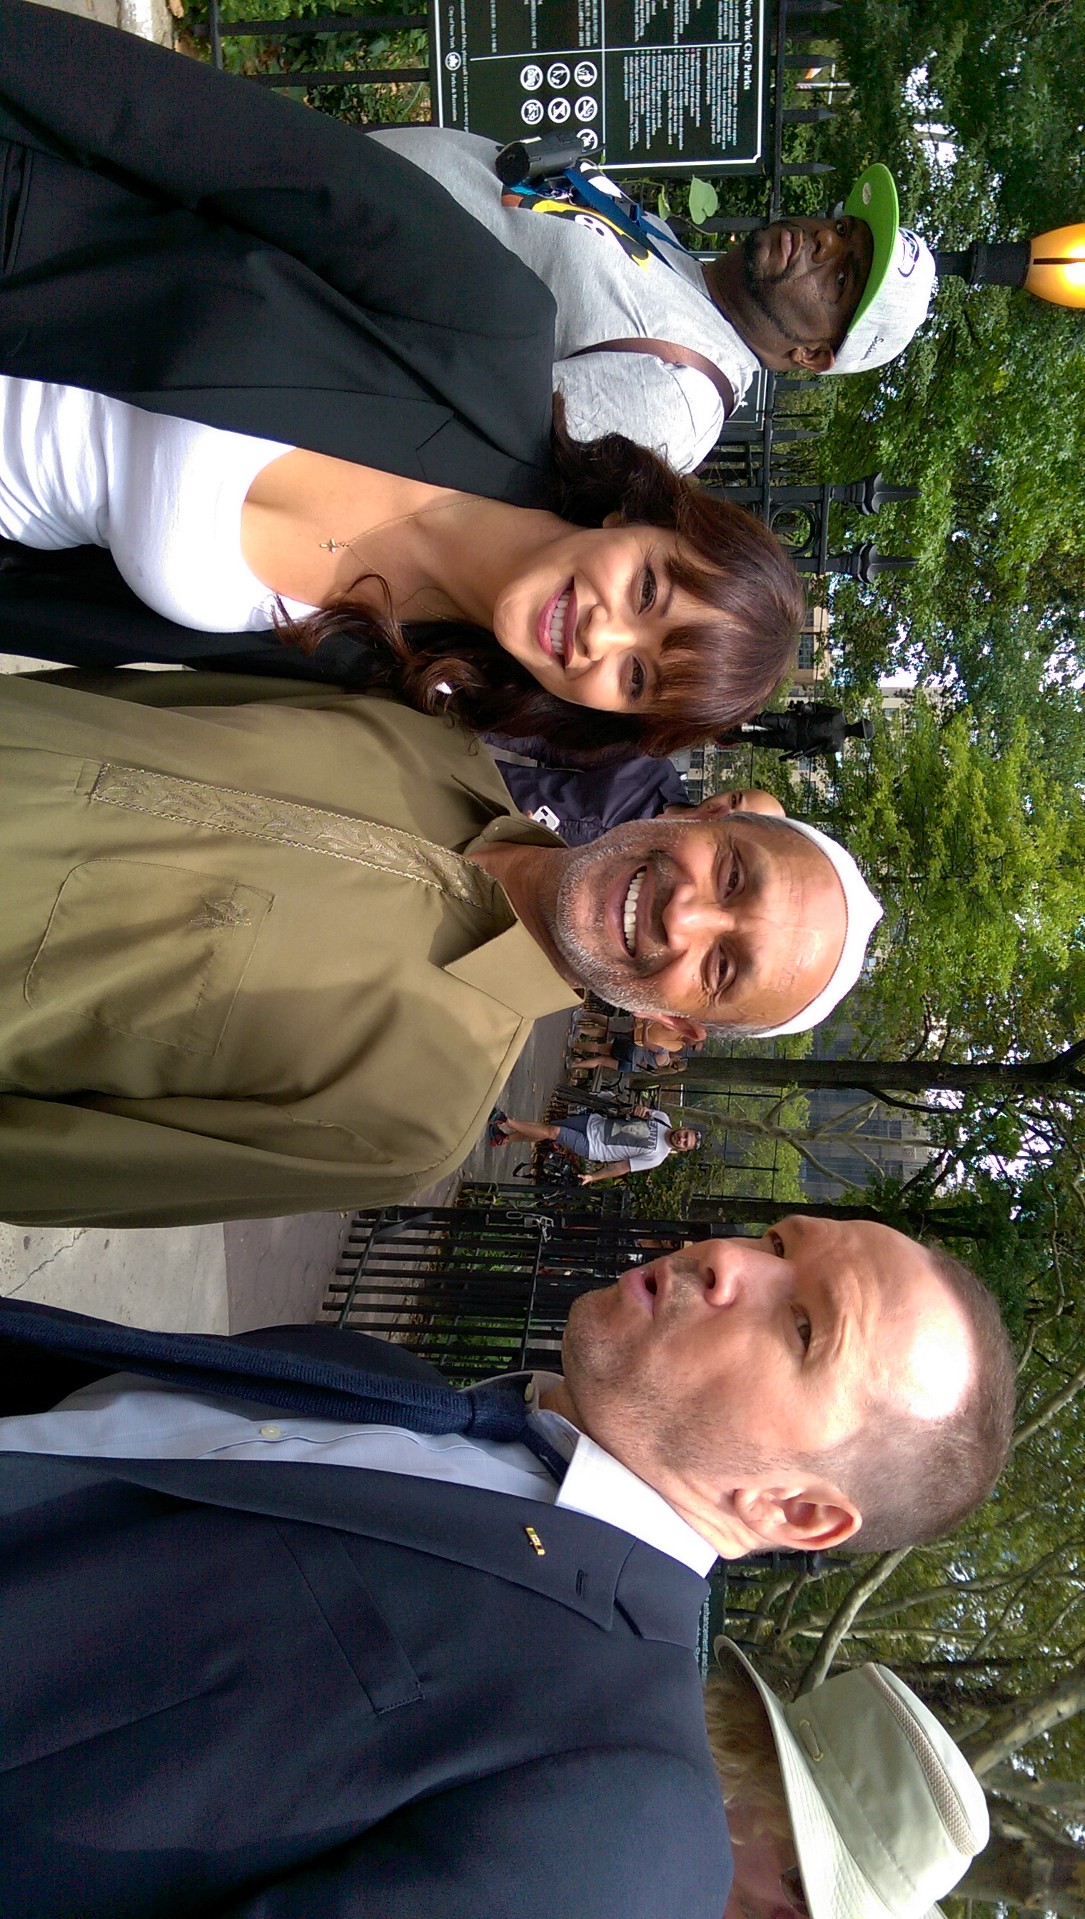 On the set of Blue Bloods with Marisa Ramirez and Donnie Wahlberg